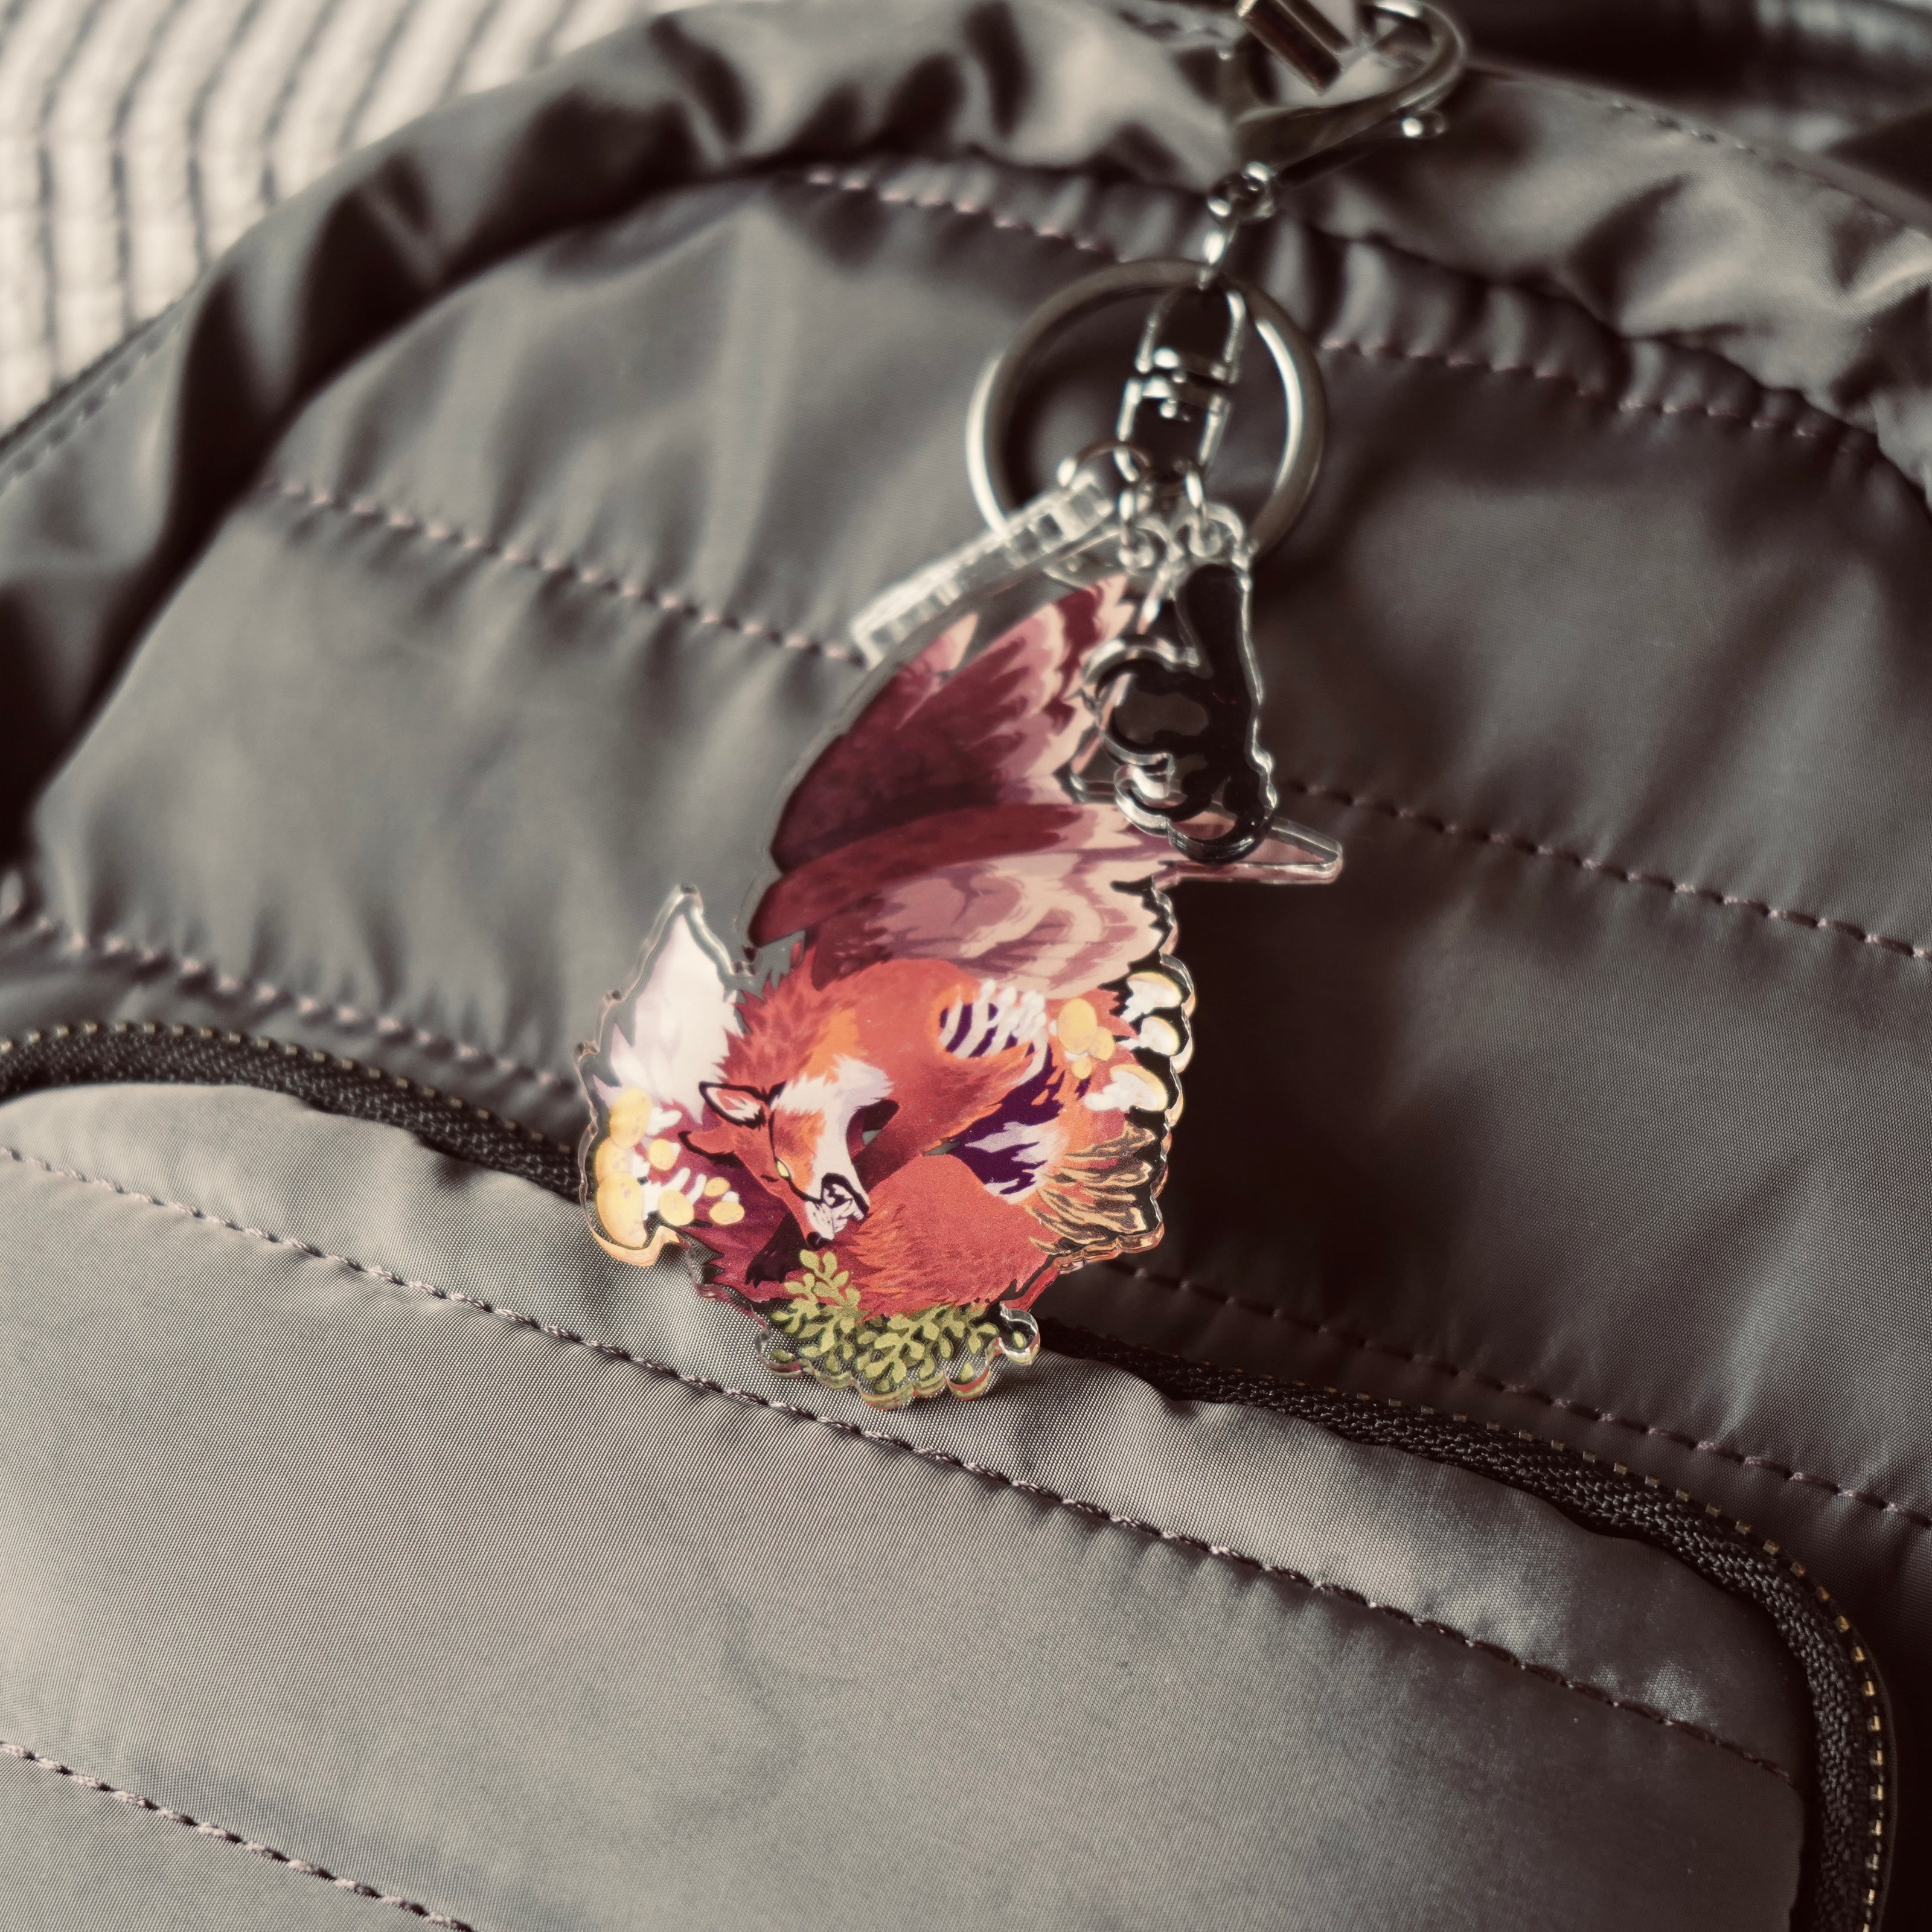 Keychain of acrylic charms, the main charm is of a dead fox growing wings and plants, blooming